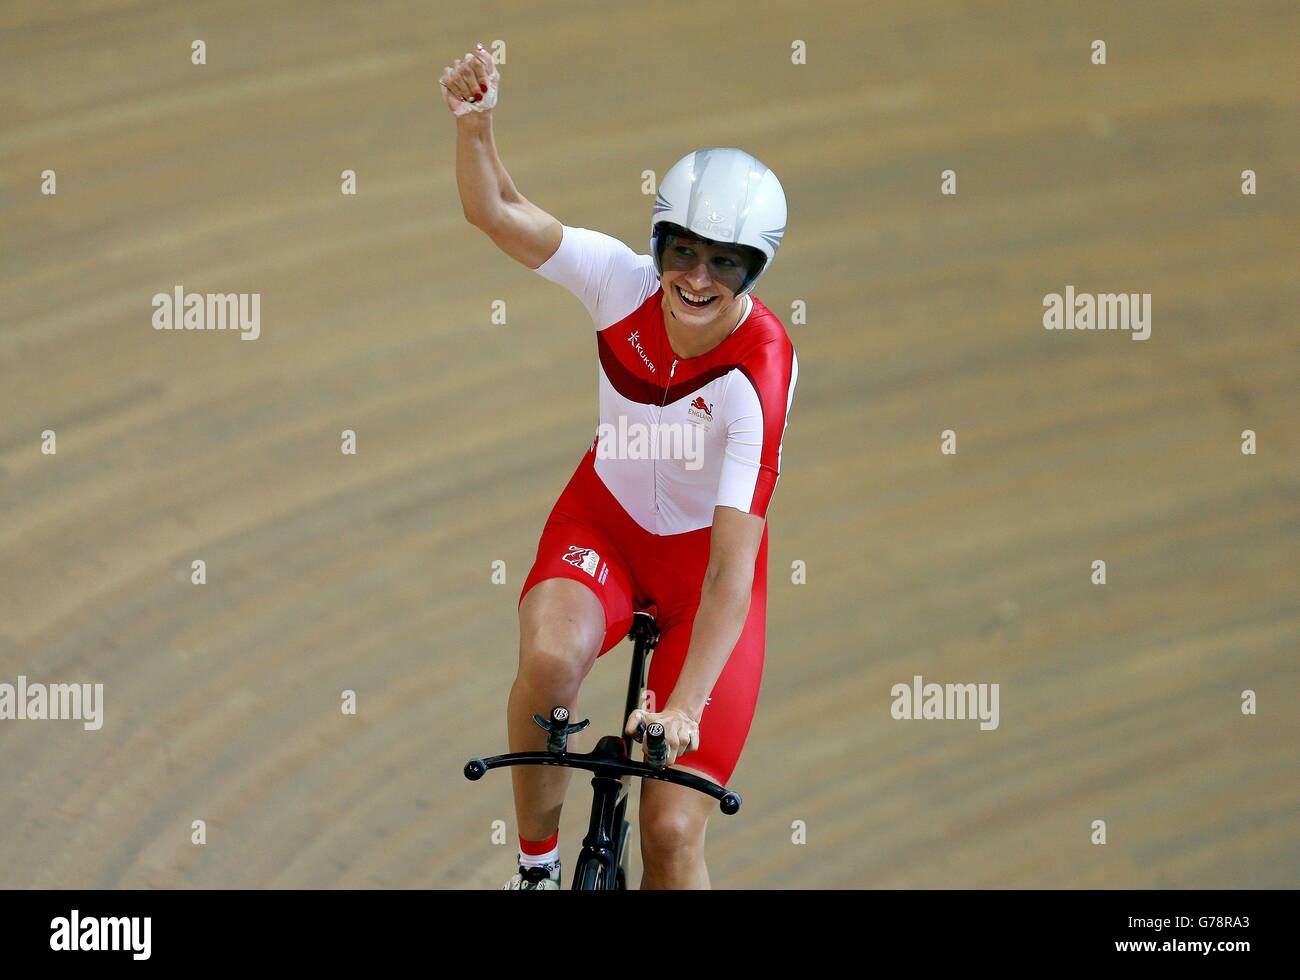 England's Joanna Rowsell celebrates her Gold medal in the Women's 3000m ...